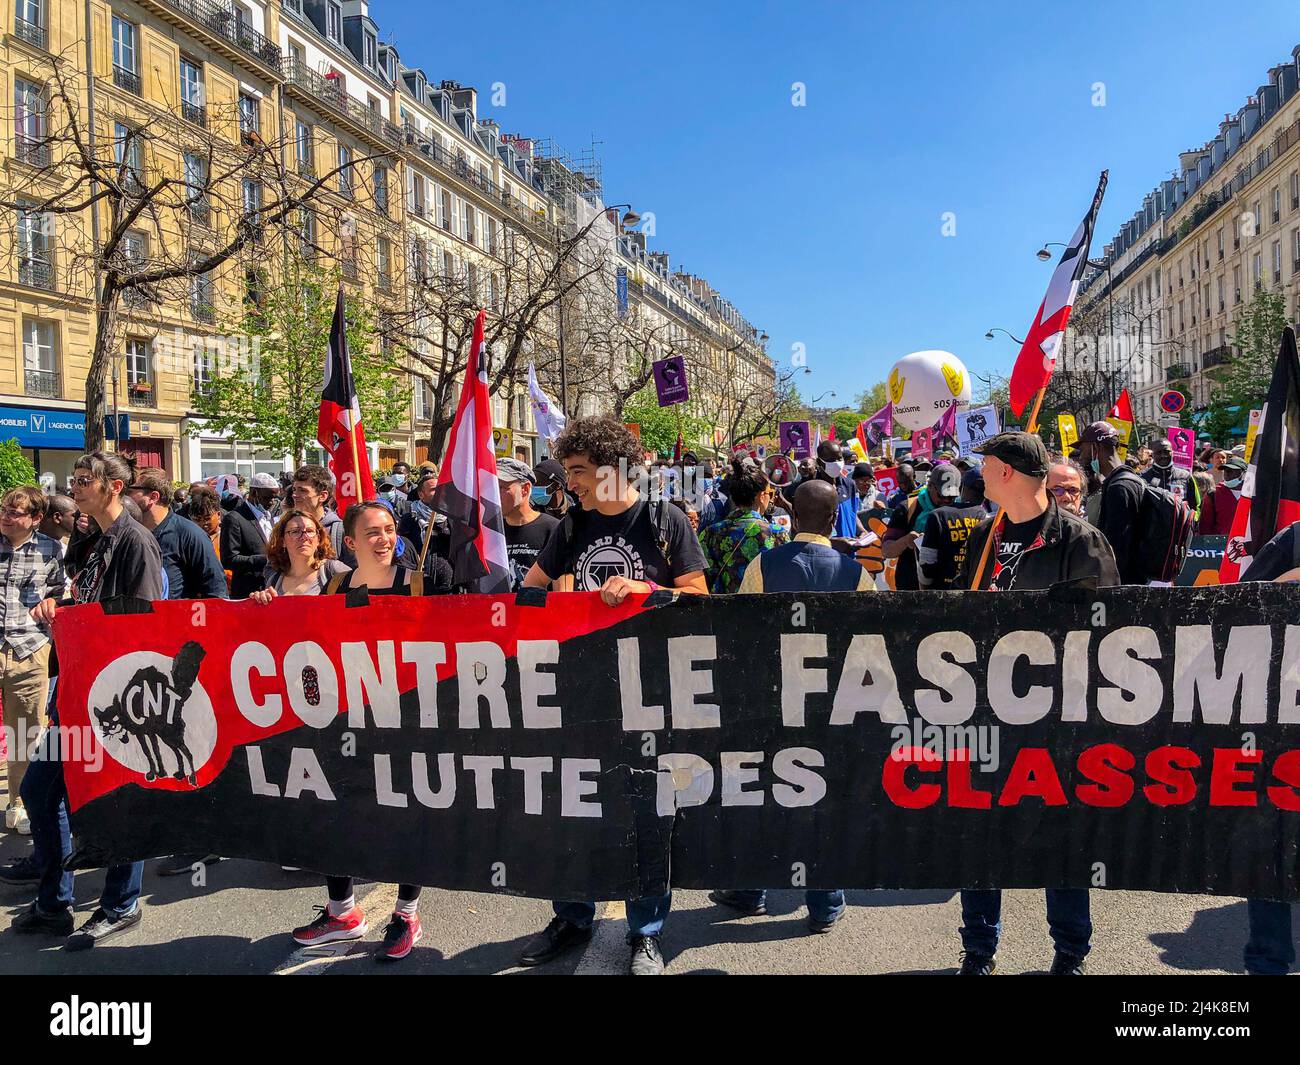 Paris, France, Crowd People Demonstrating at Anti-Extreme Right, Anti-Racism Demonstration Stock Photo